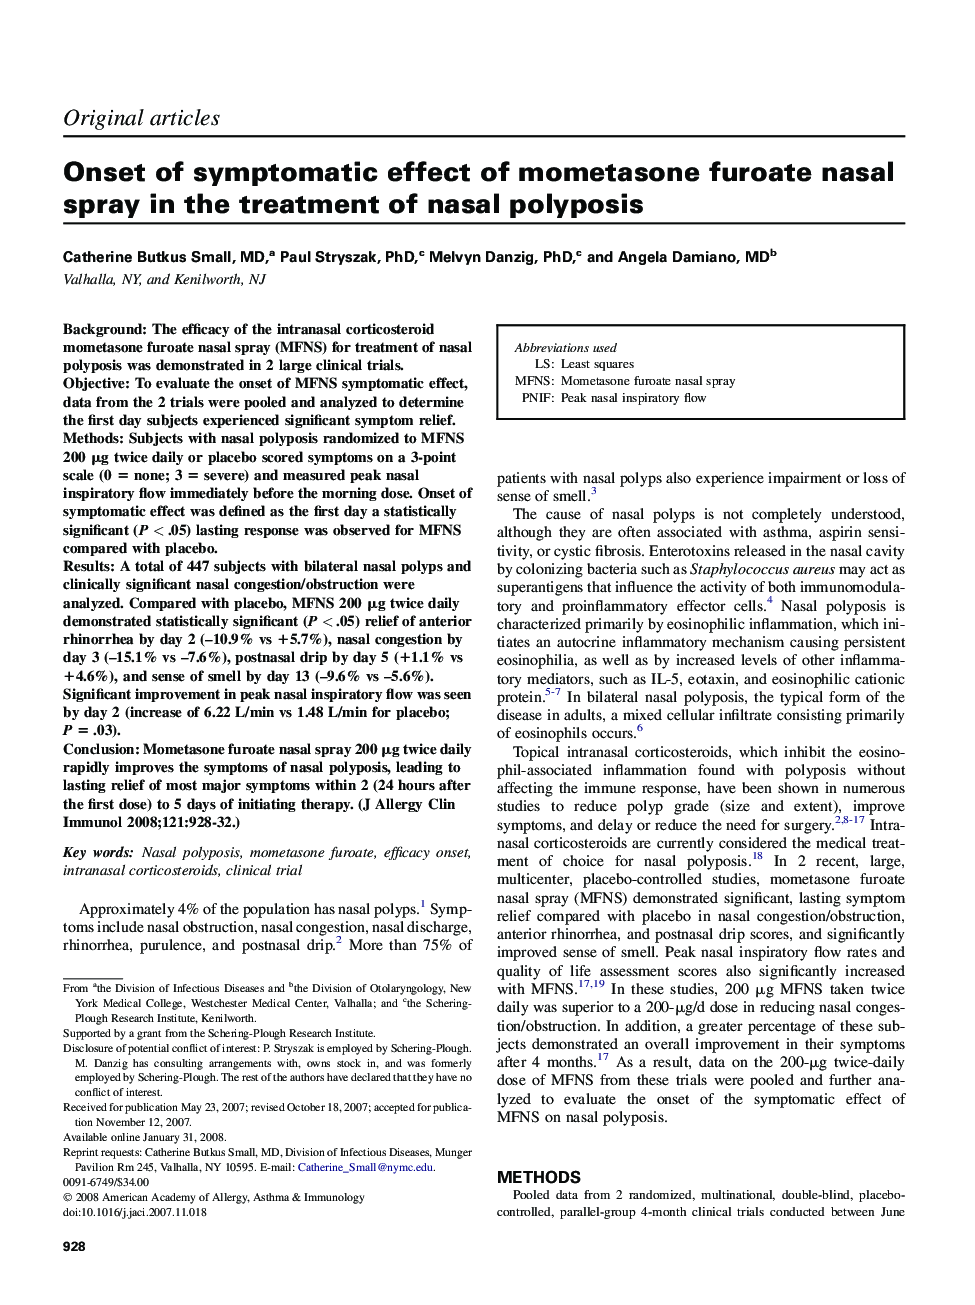 Onset of symptomatic effect of mometasone furoate nasal spray in the treatment of nasal polyposis 